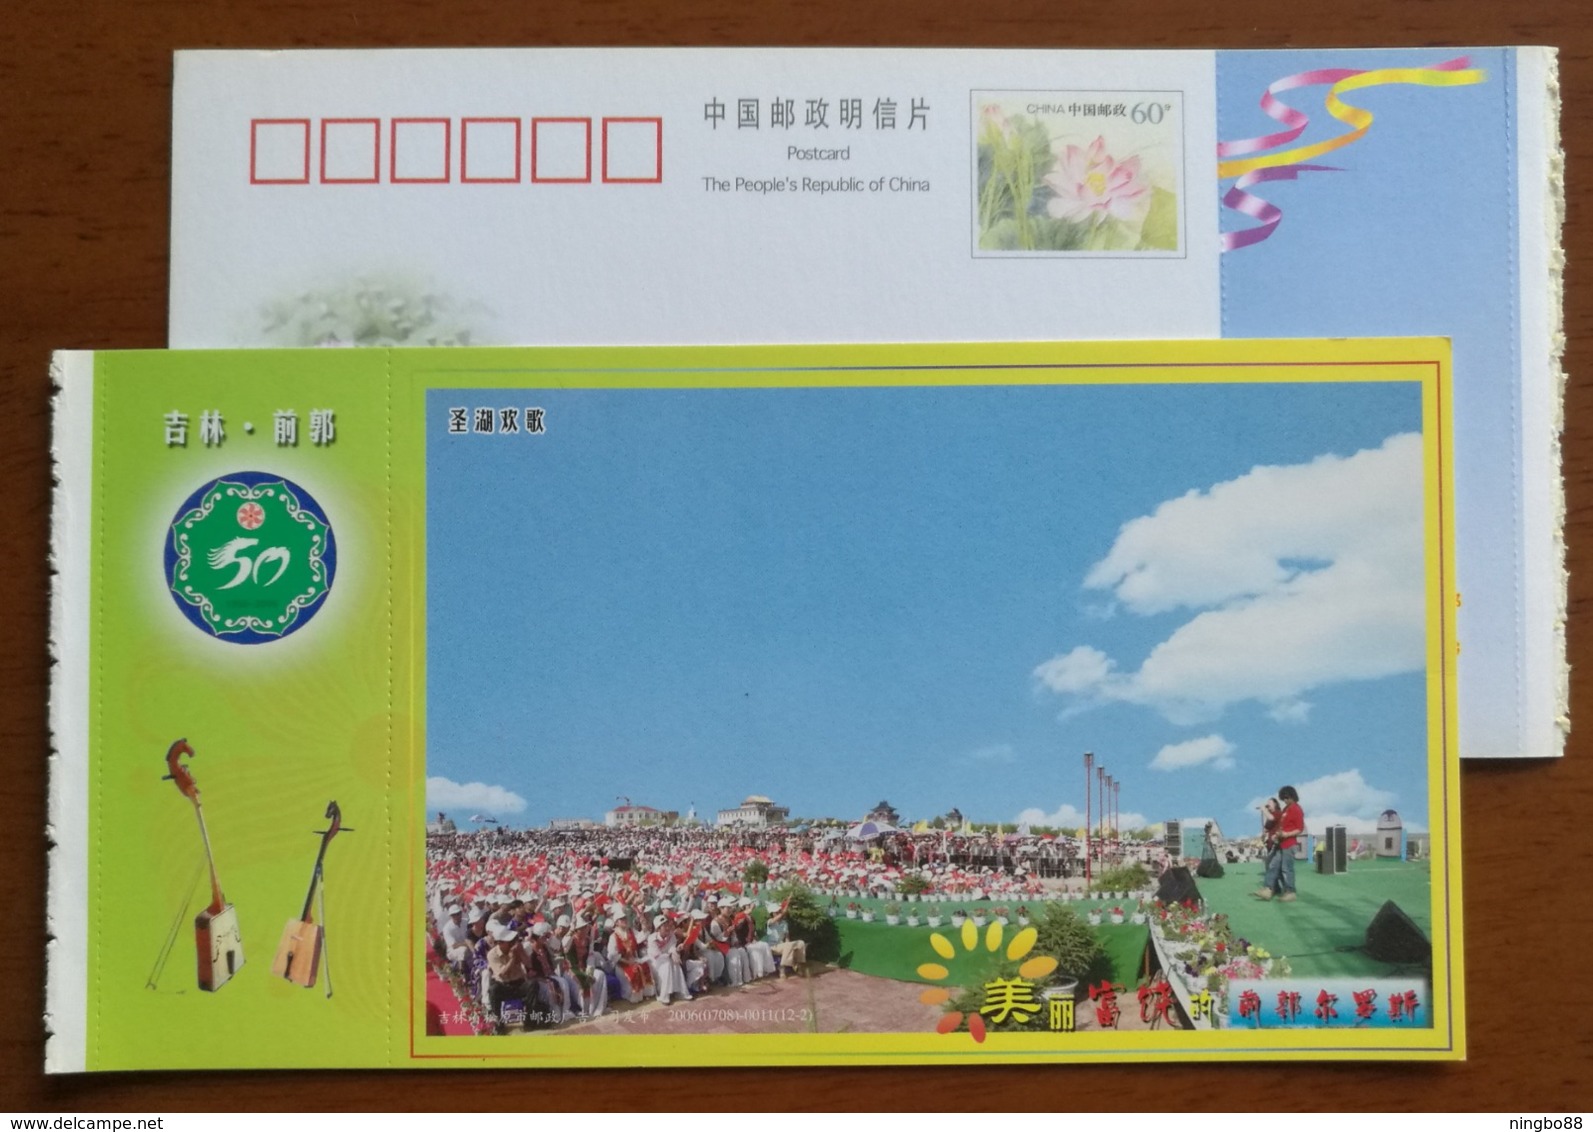 Horse-headed Lyre,holy Lake Music Festival,CN 06 Qianguo 50th Anni. Of Mongolian Autonomous County Pre-stamped Card - Music